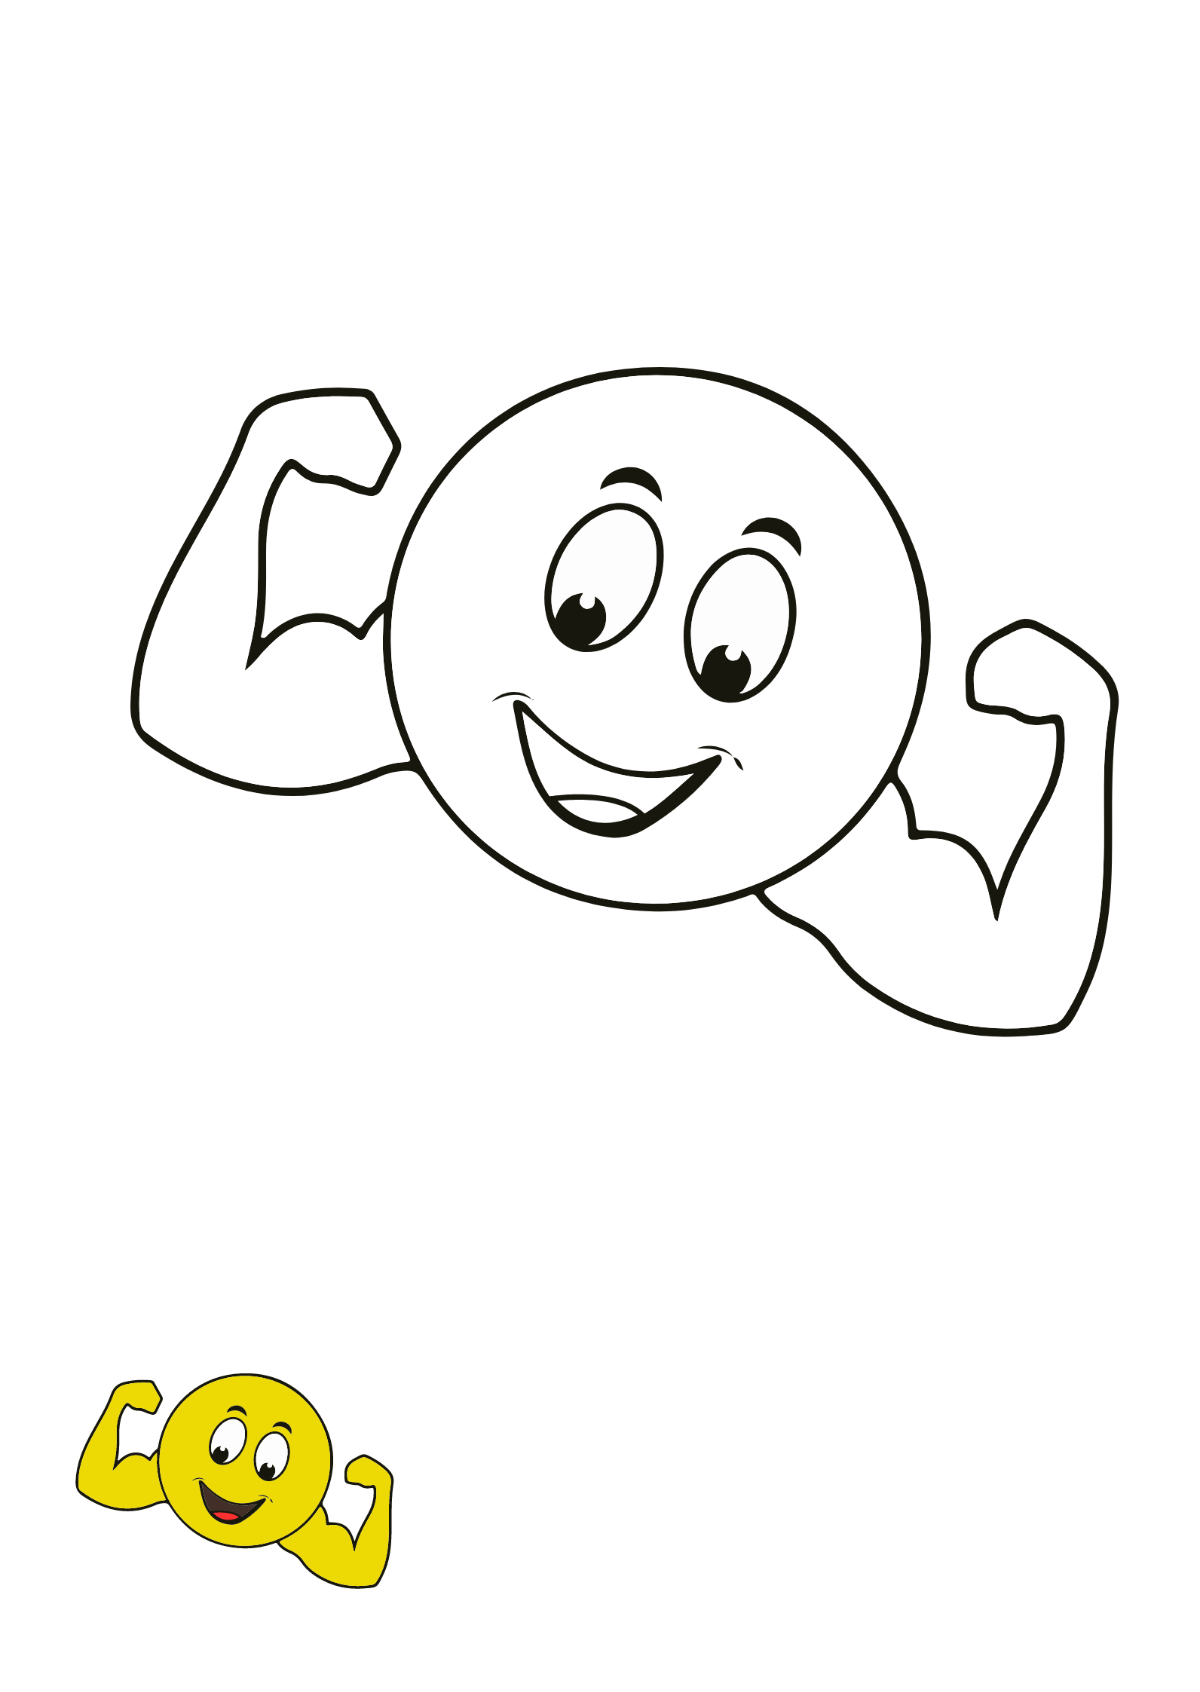 Healthy Smiley coloring page Template